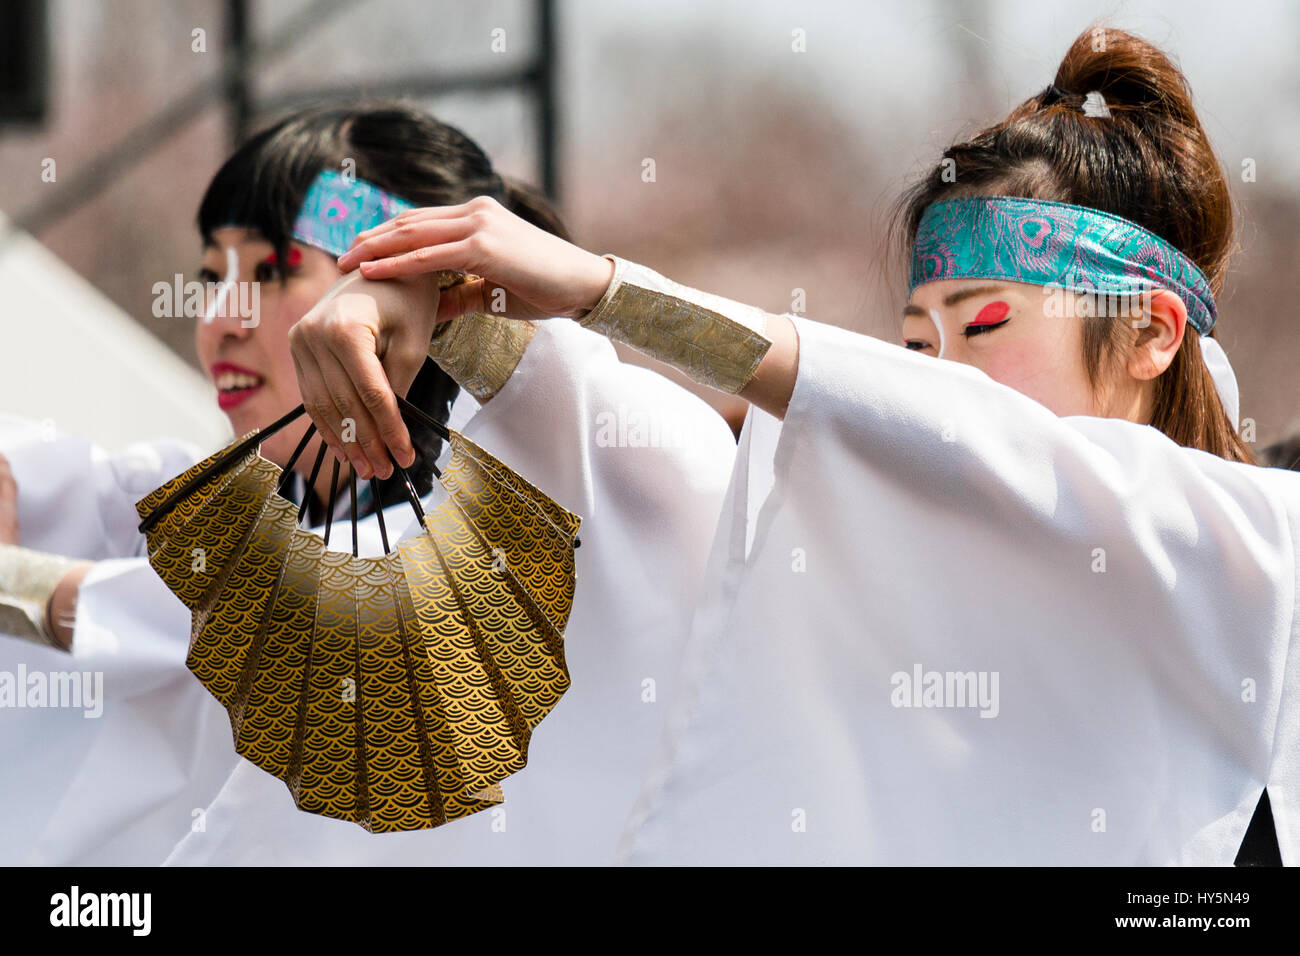 Hinokuni Yosakoi dance Festival in Japan. Close-up of two women dancers in white yukata and blue head-band, holding arms out and holding open fan. Stock Photo